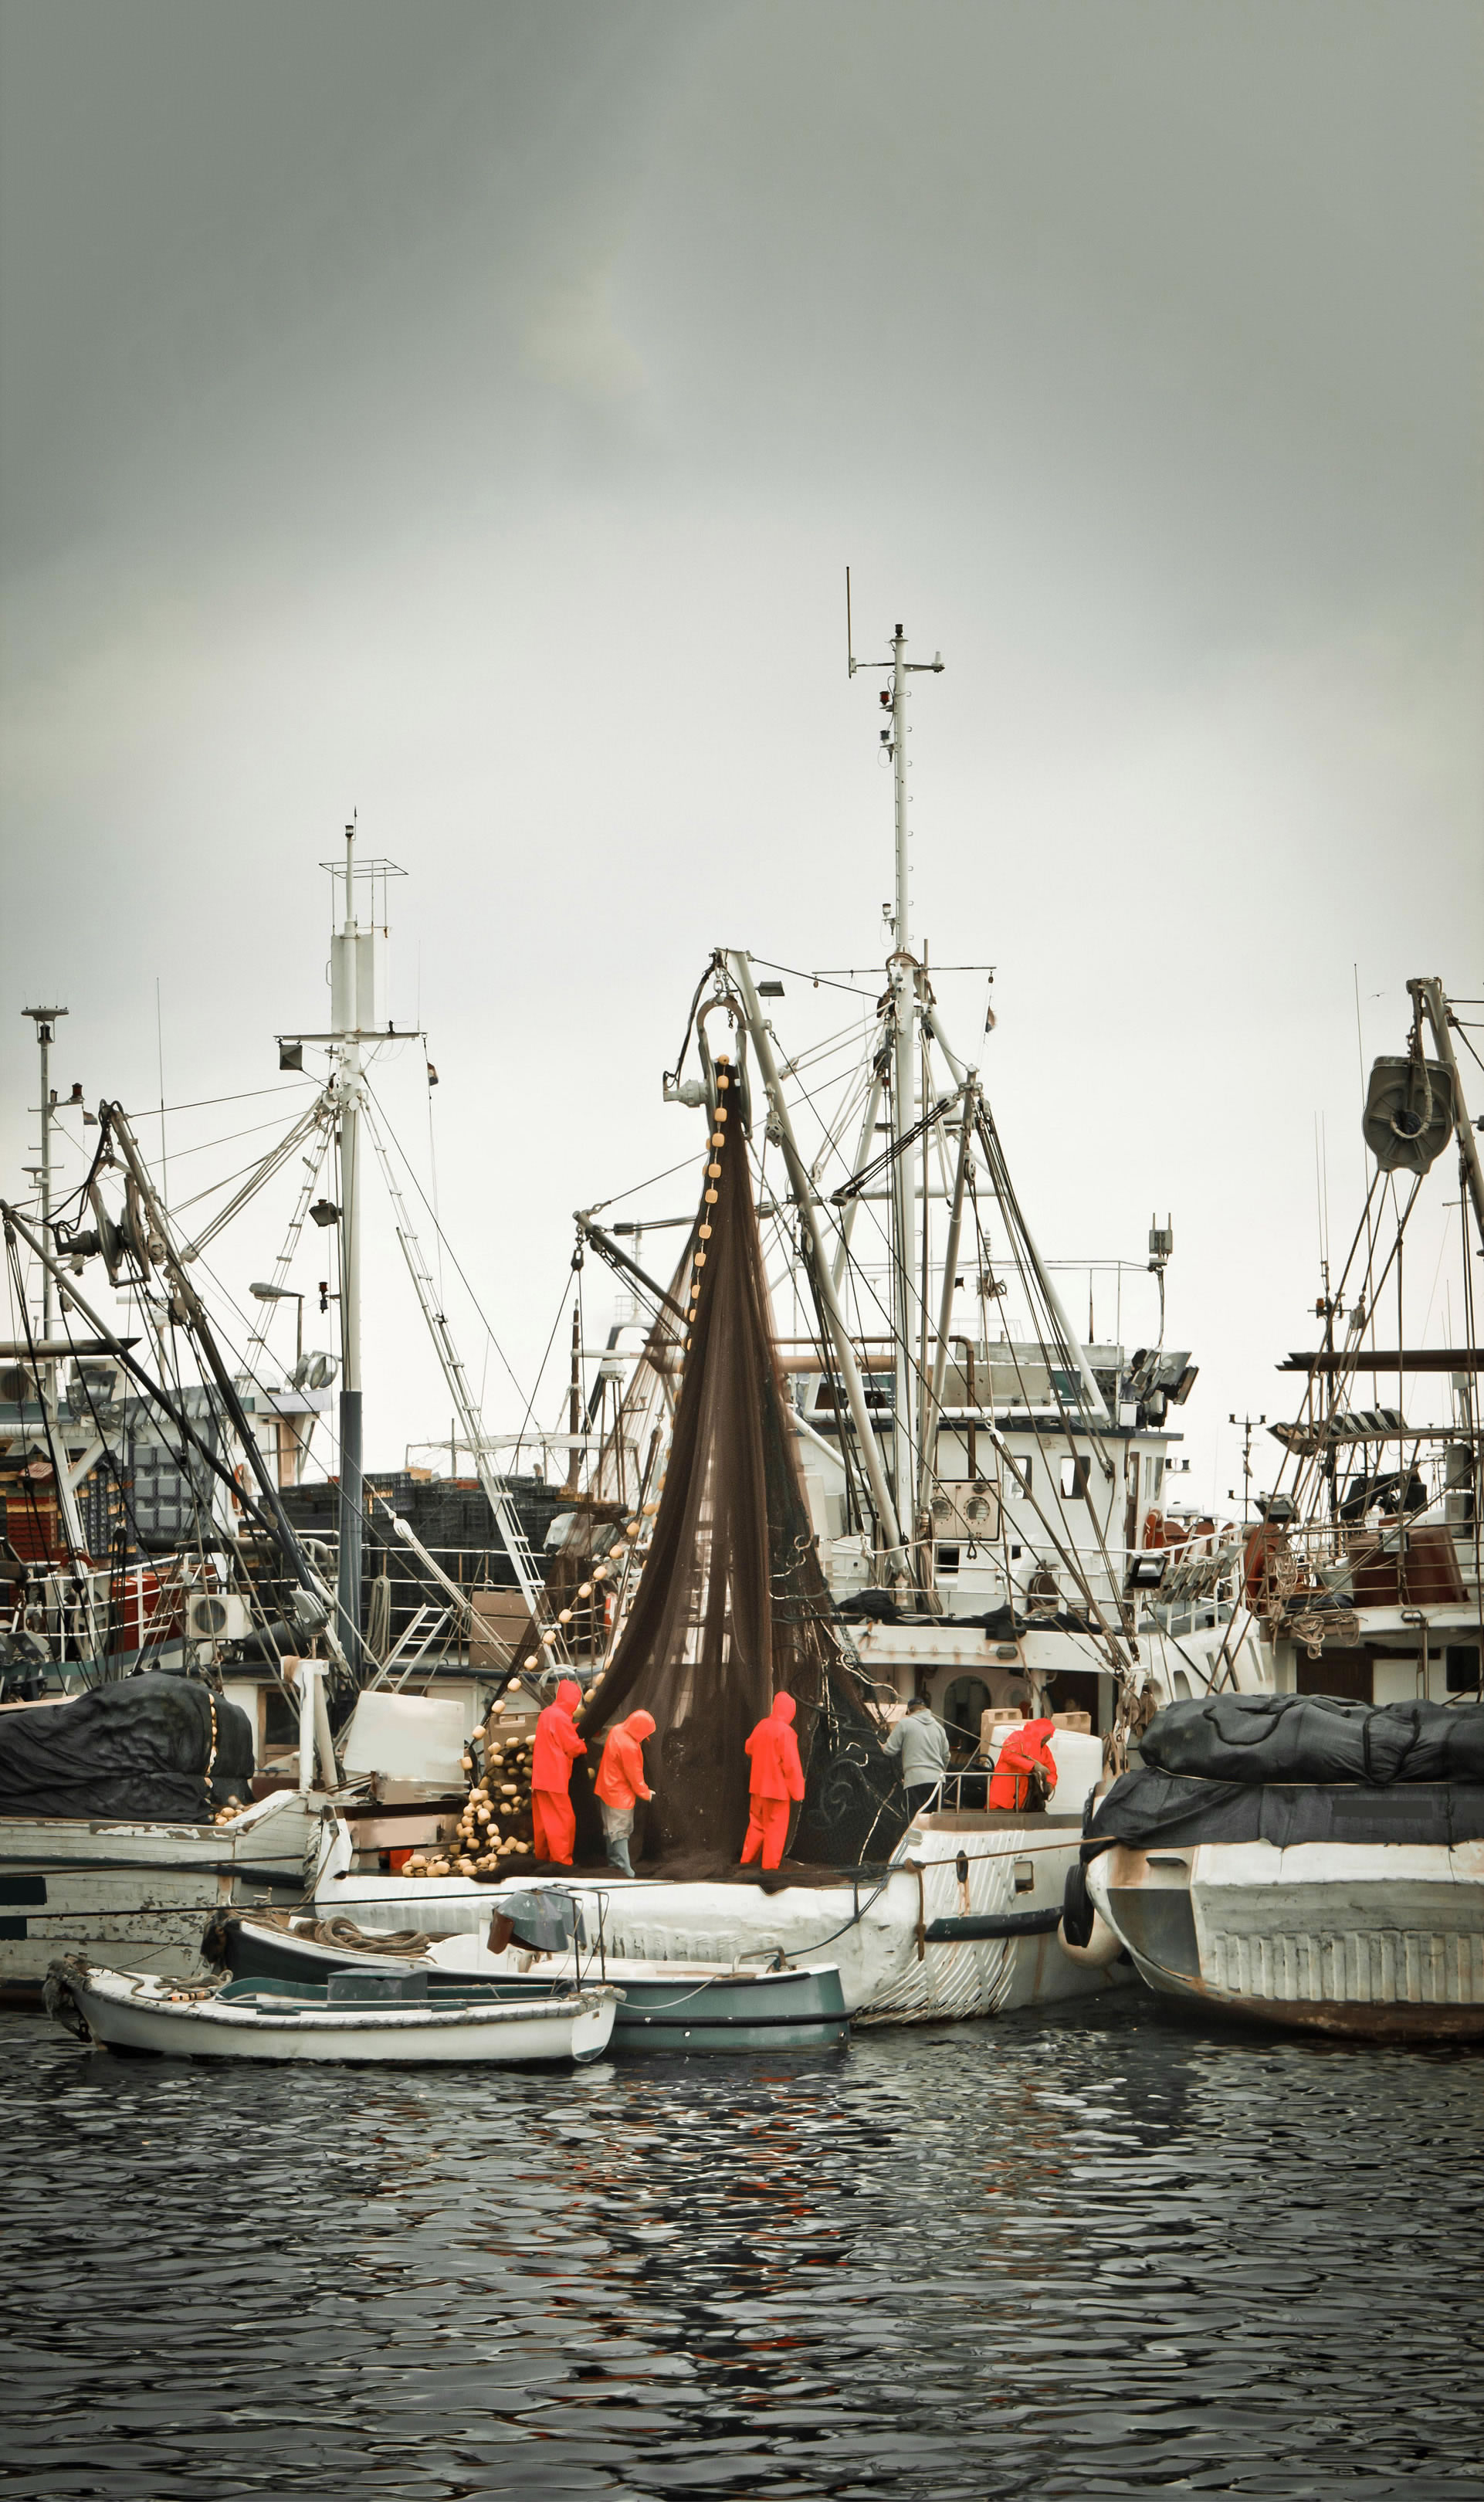 Fishermen in professional suits tending to a fishing net on a trawler, amid a fleet of boats in a fishing harbour.